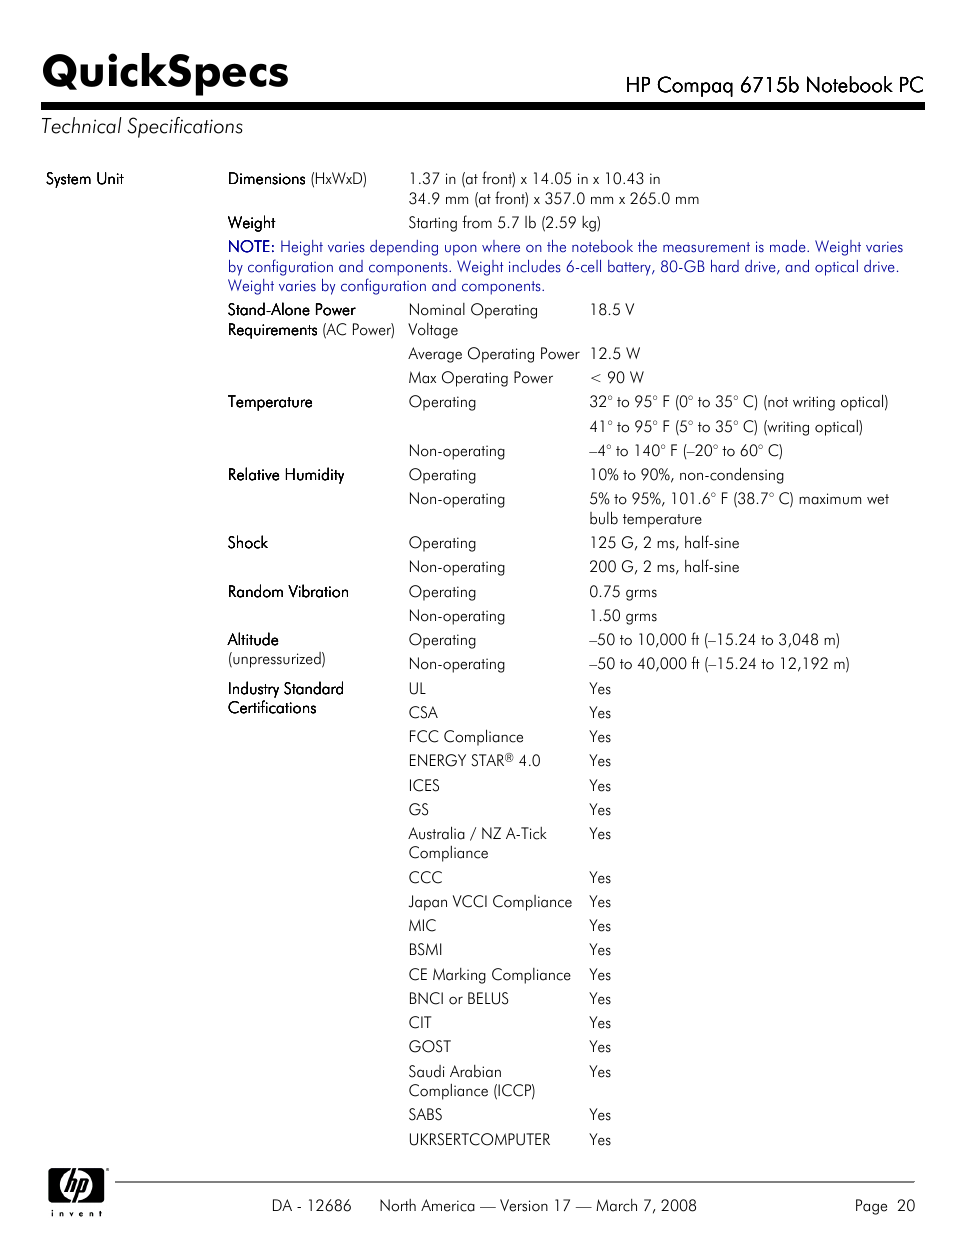 Technical specifications, Quickspecs | HP 6715B User Manual | Page 20 / 42